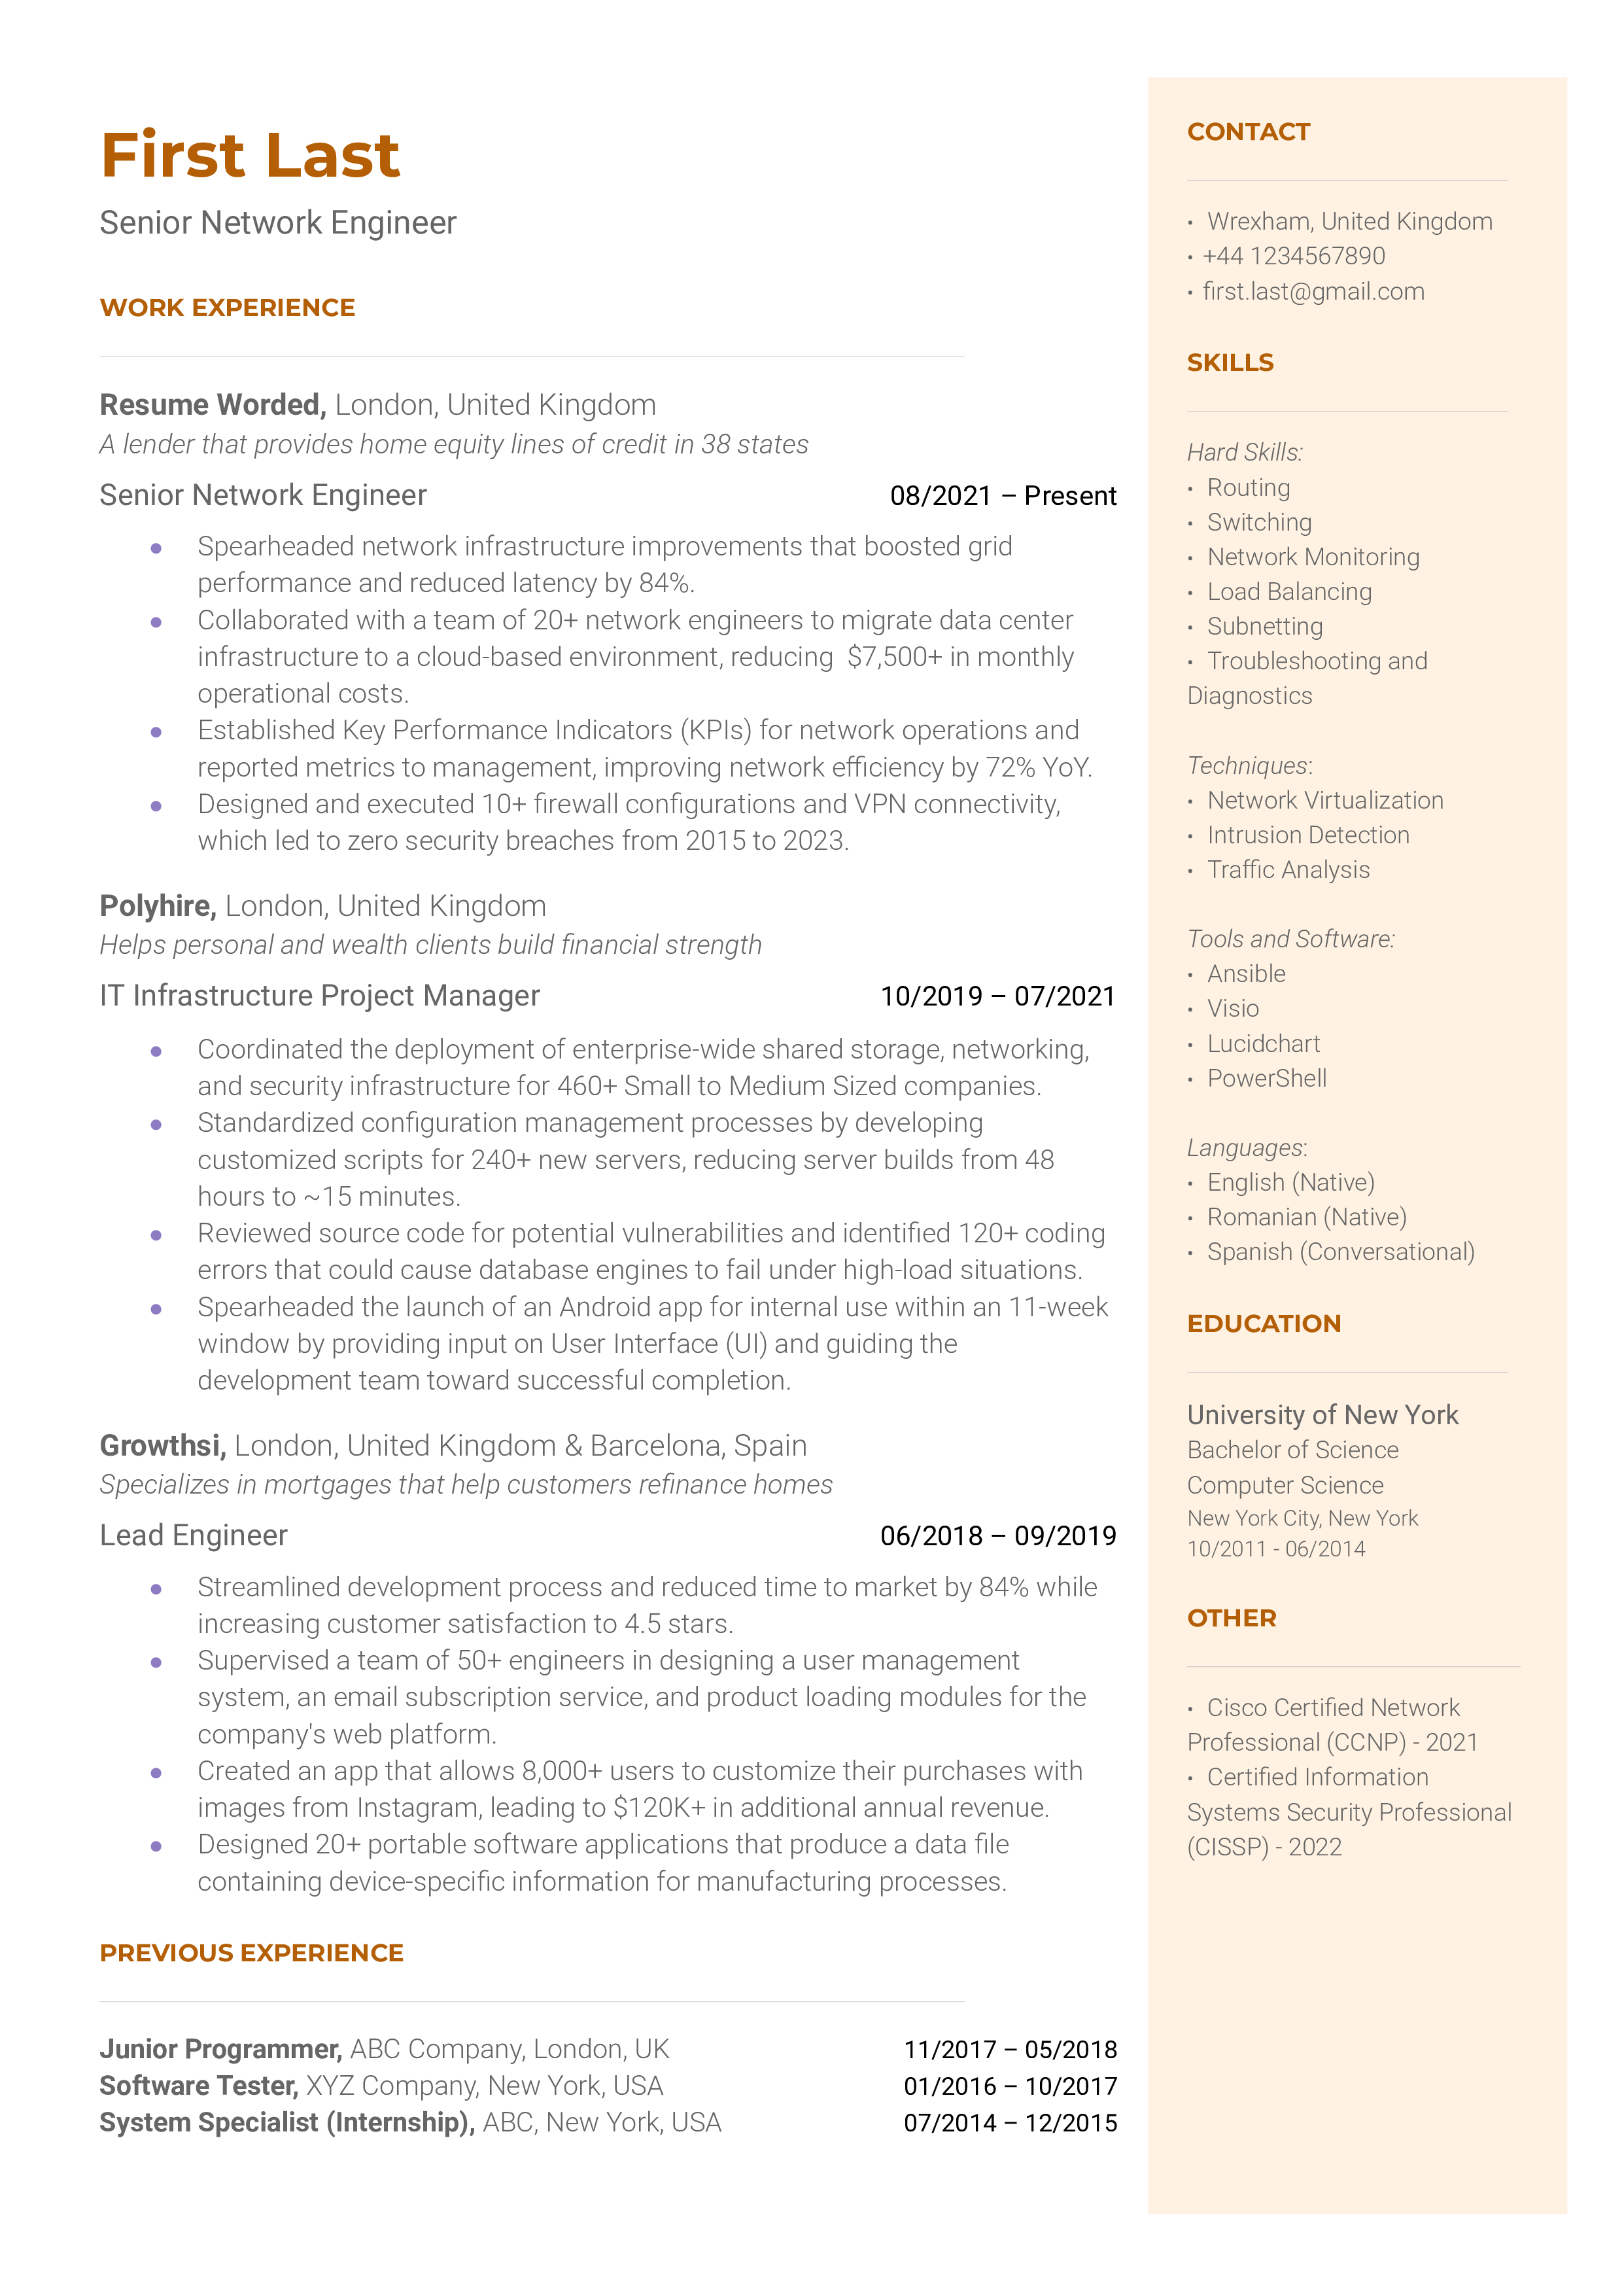 A well-crafted CV highlighting technical skills and problem-solving aptitude of a Senior Network Engineer.